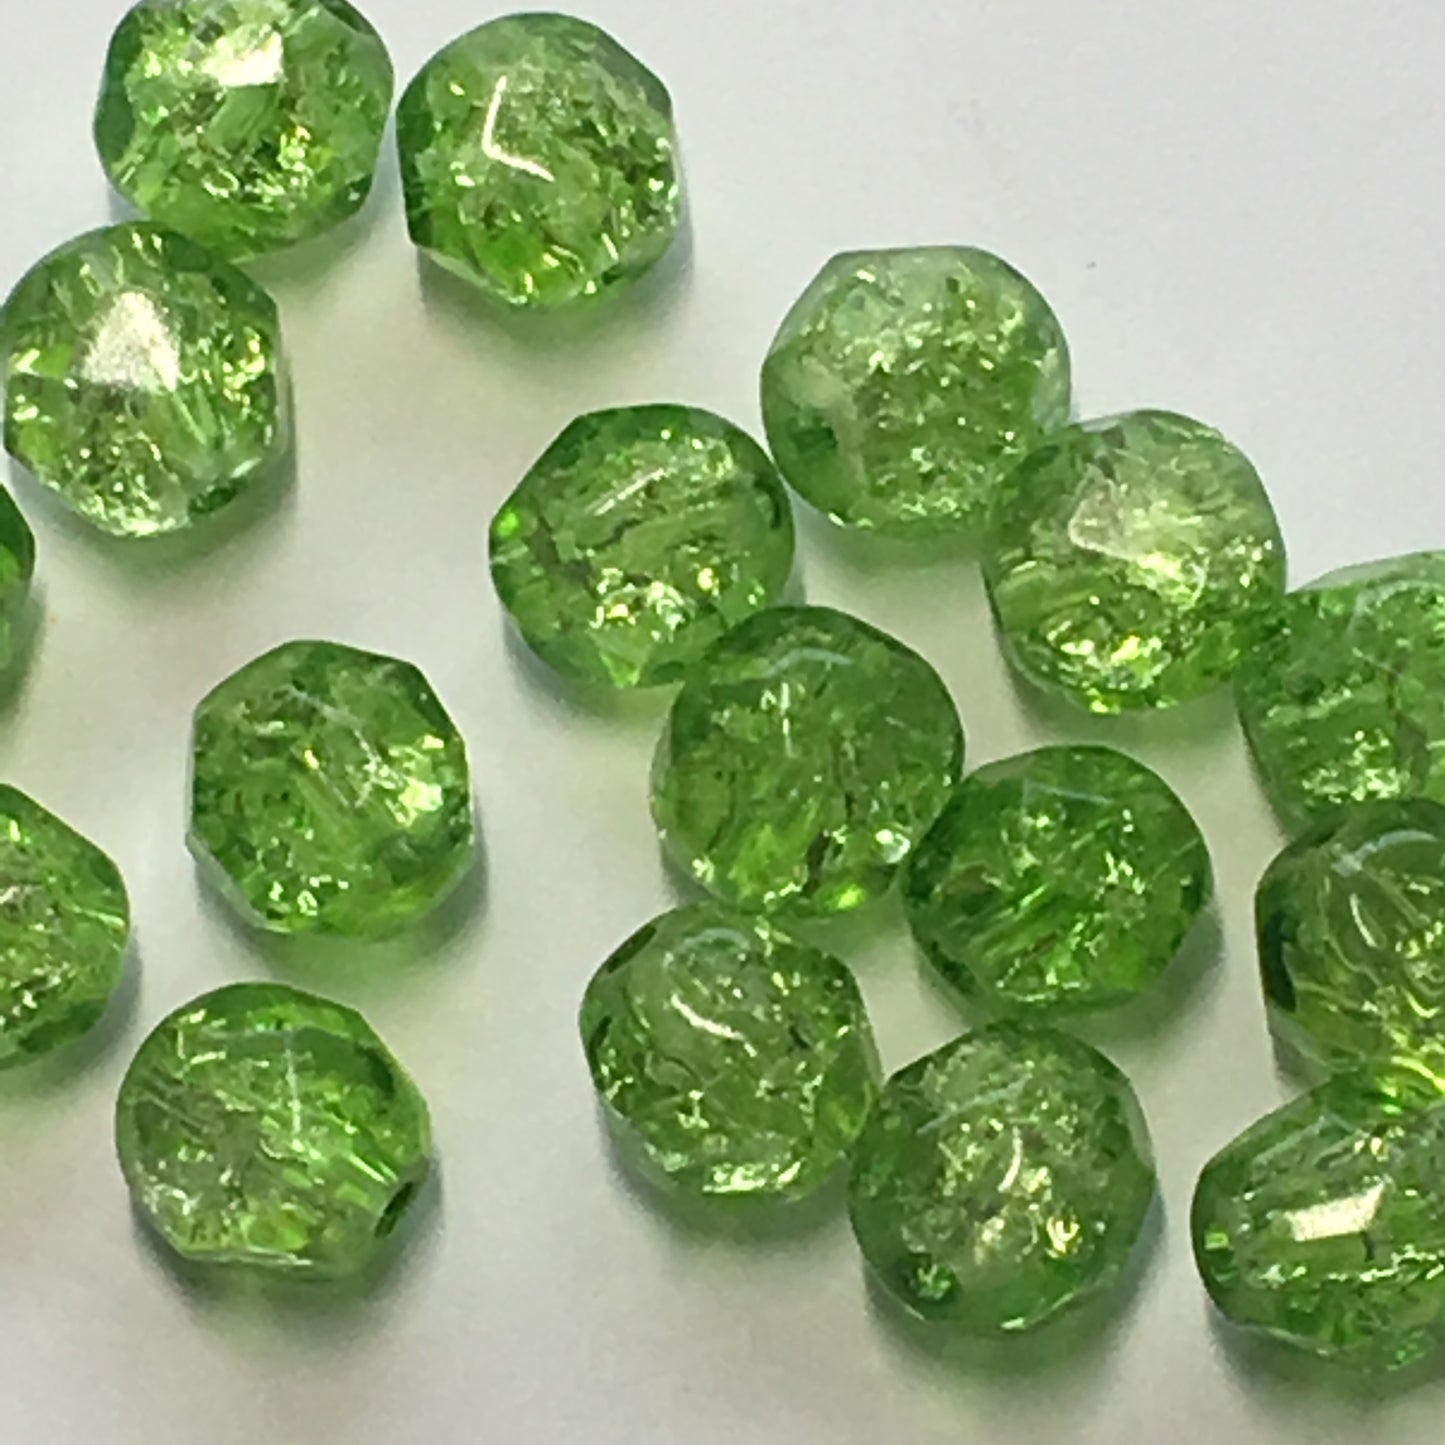 Green Crackle Glass Faceted Beads, 8 mm - 24 Beads